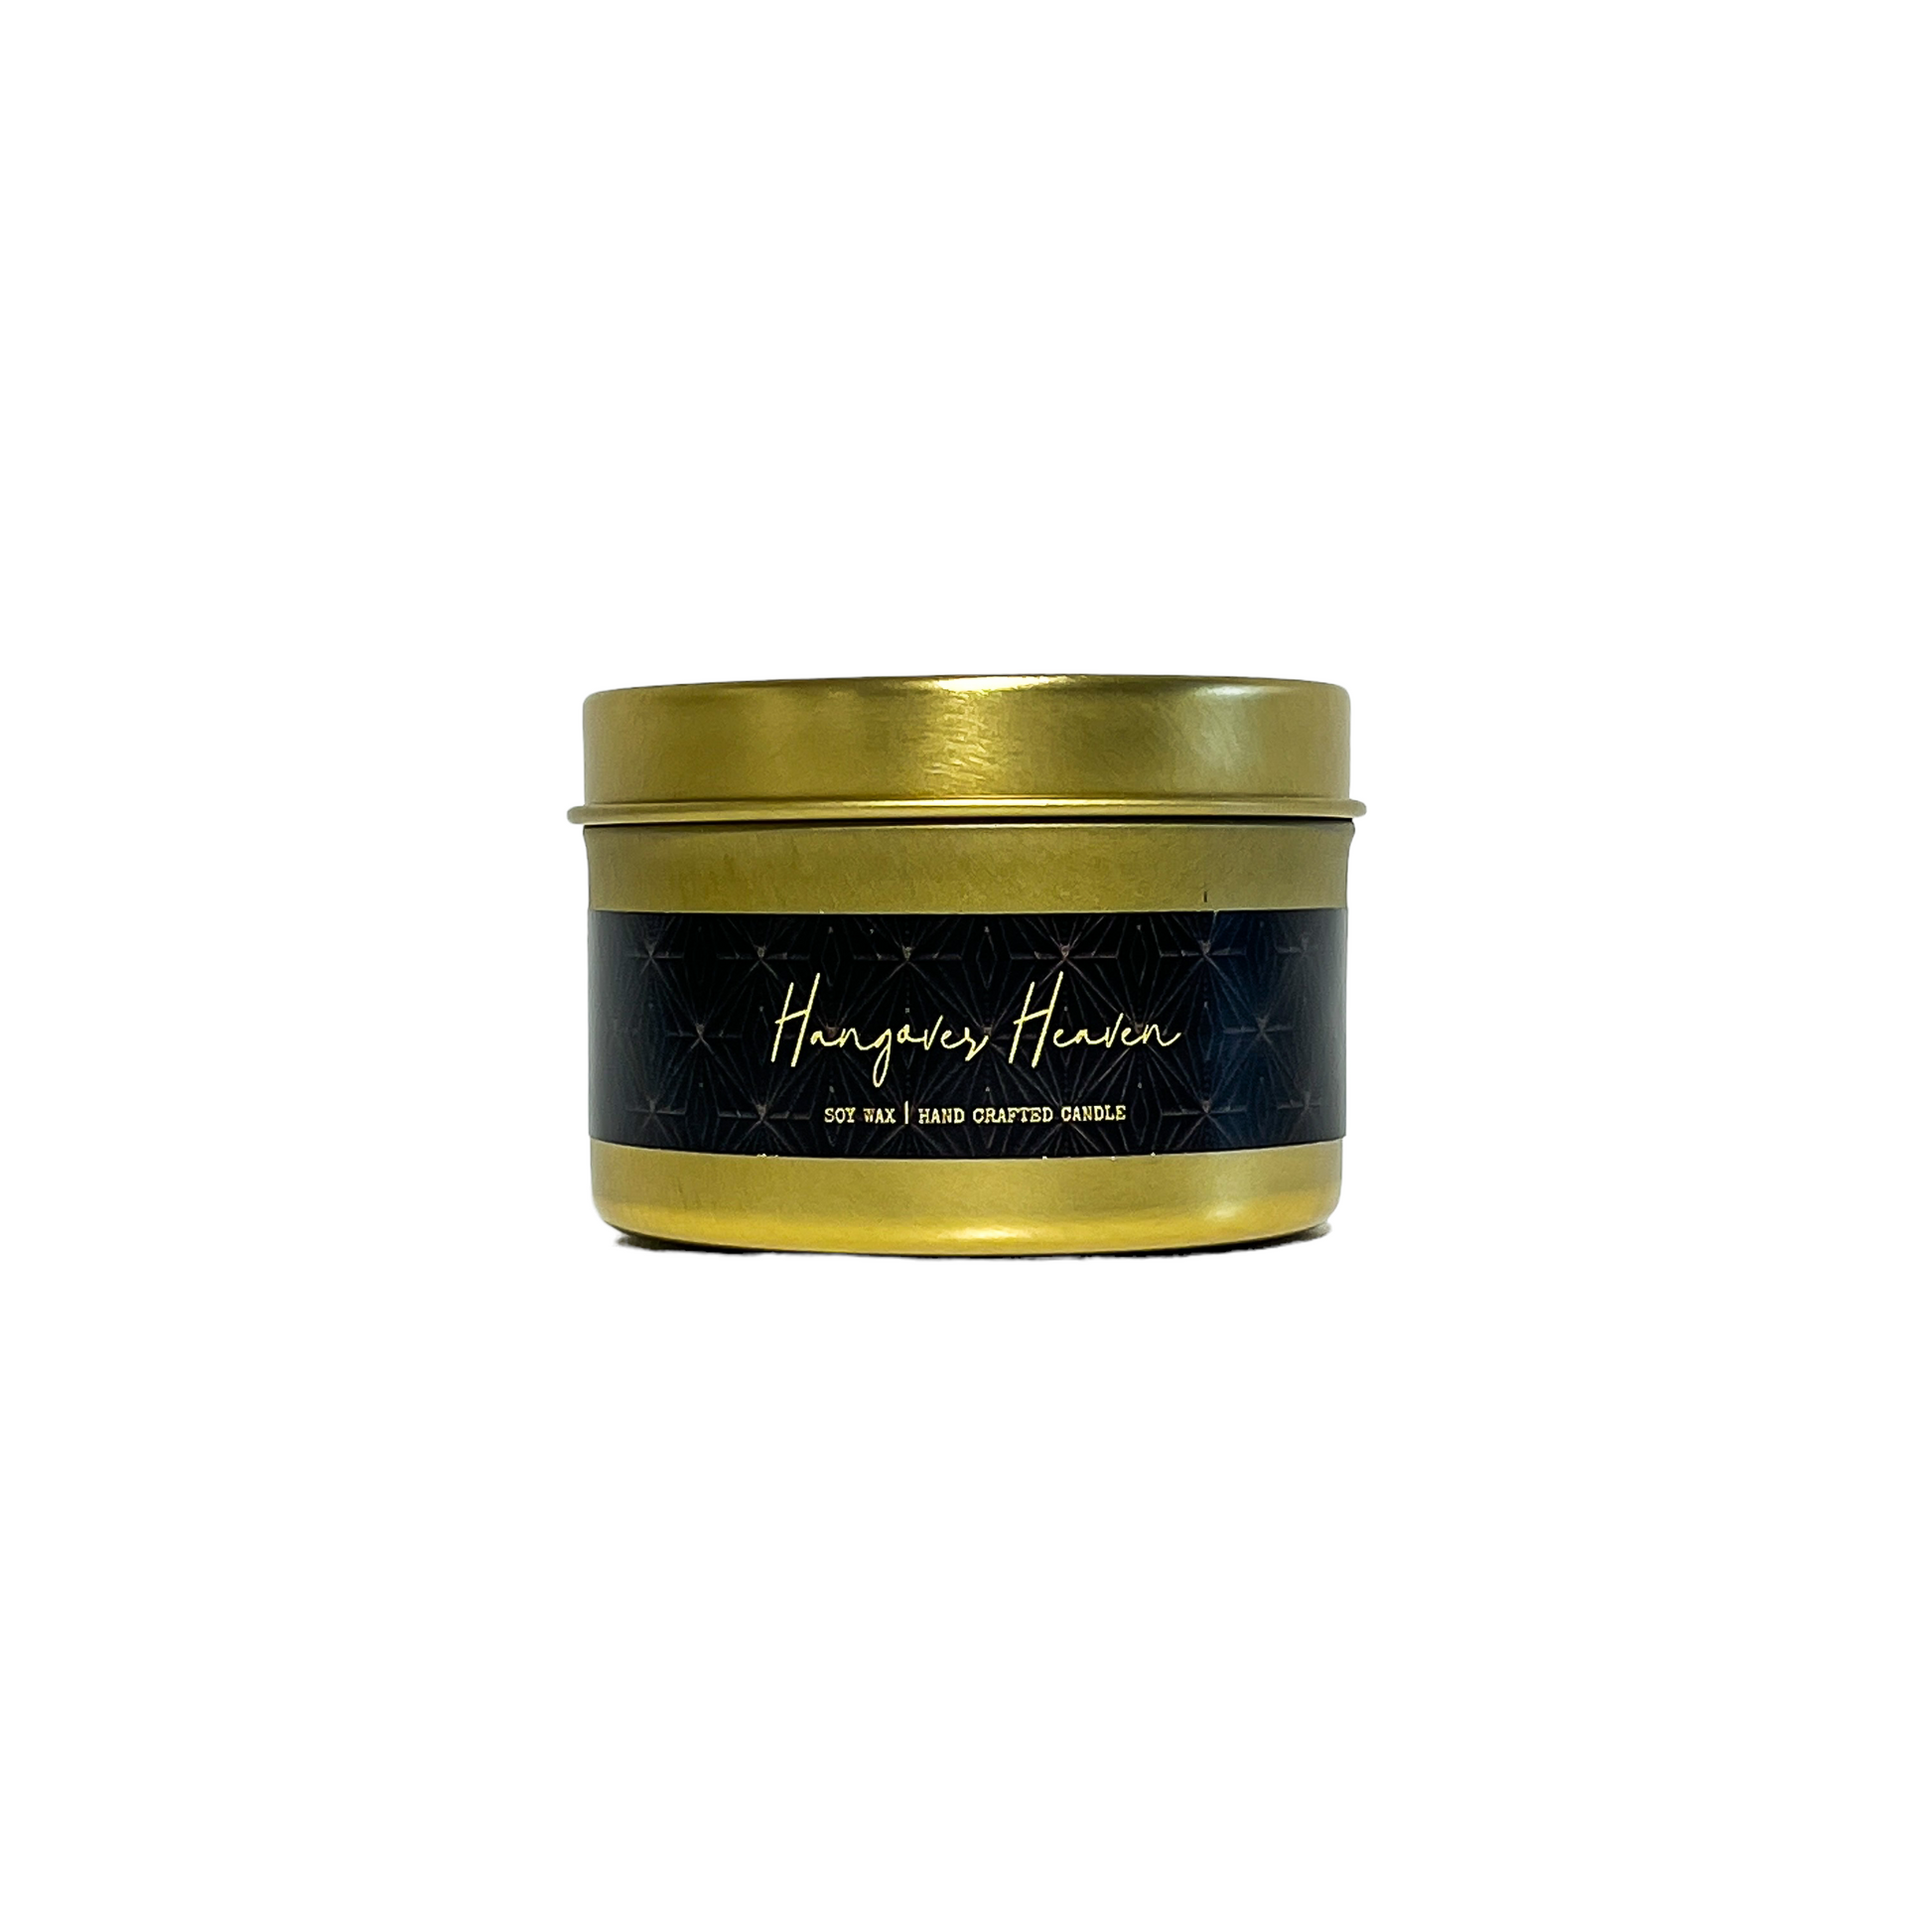 Gold, four ounce tin, soy wax candle with black label that reads Hangover Heaven